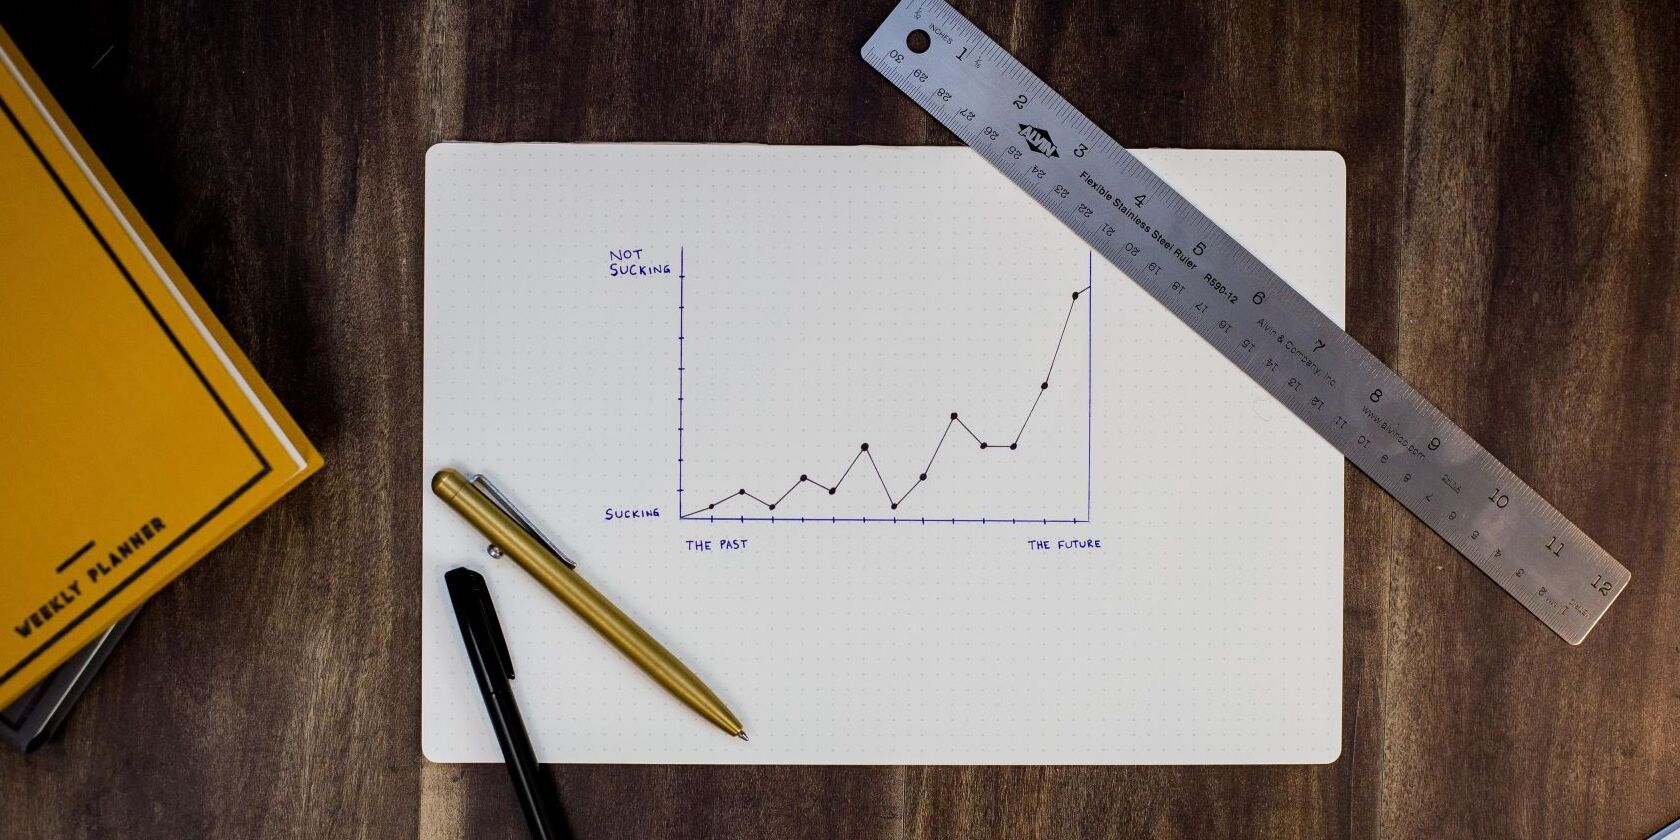 How to Build a Simple Chart With Chart.js